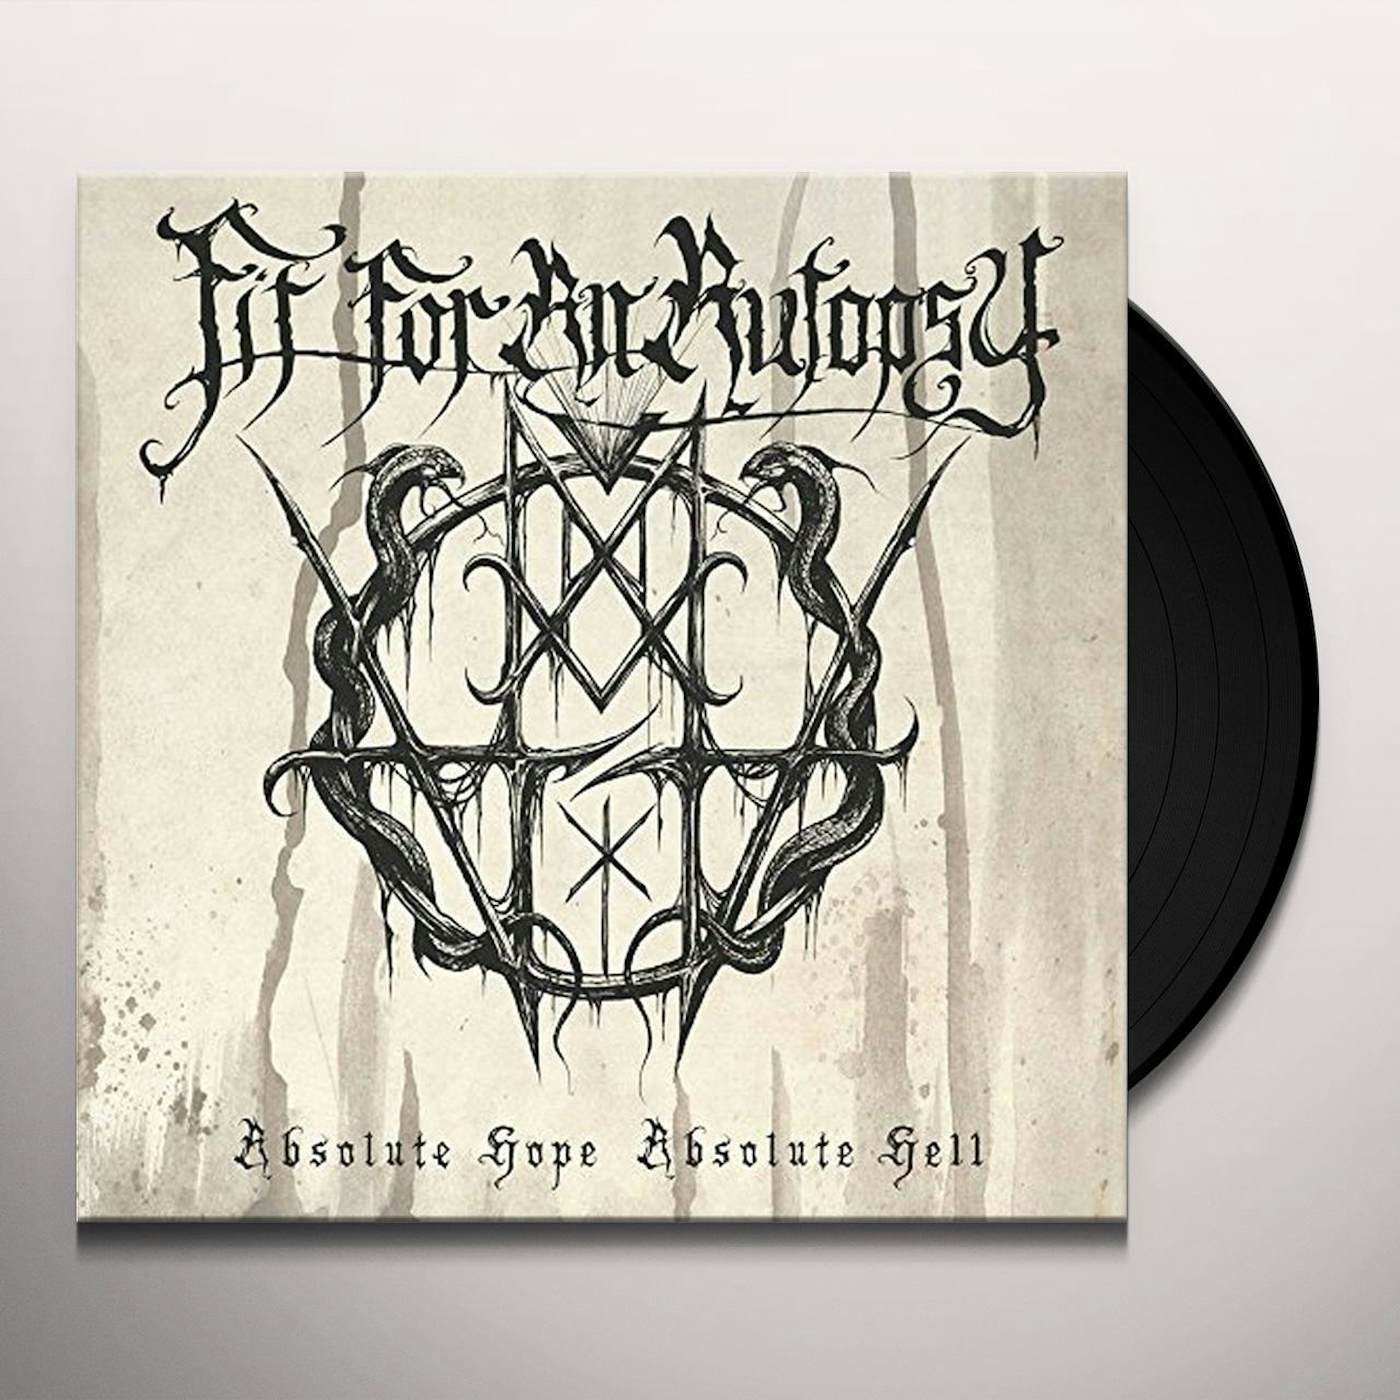 Fit For An Autopsy Absolute Hope Absolute Hell Vinyl Record